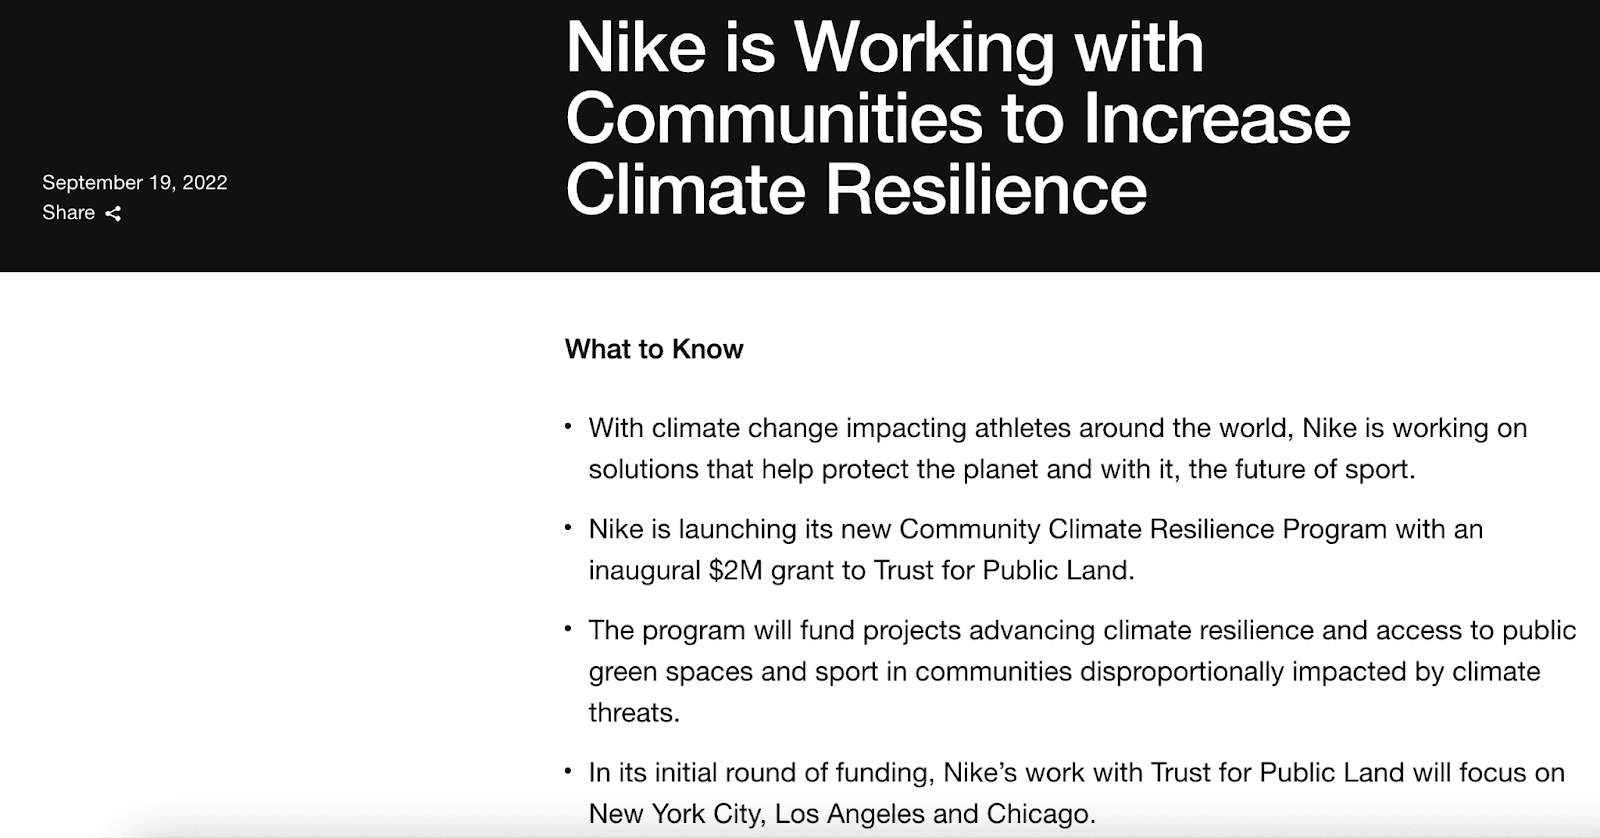 press release announcement of an commitment to climate resilience from Nike